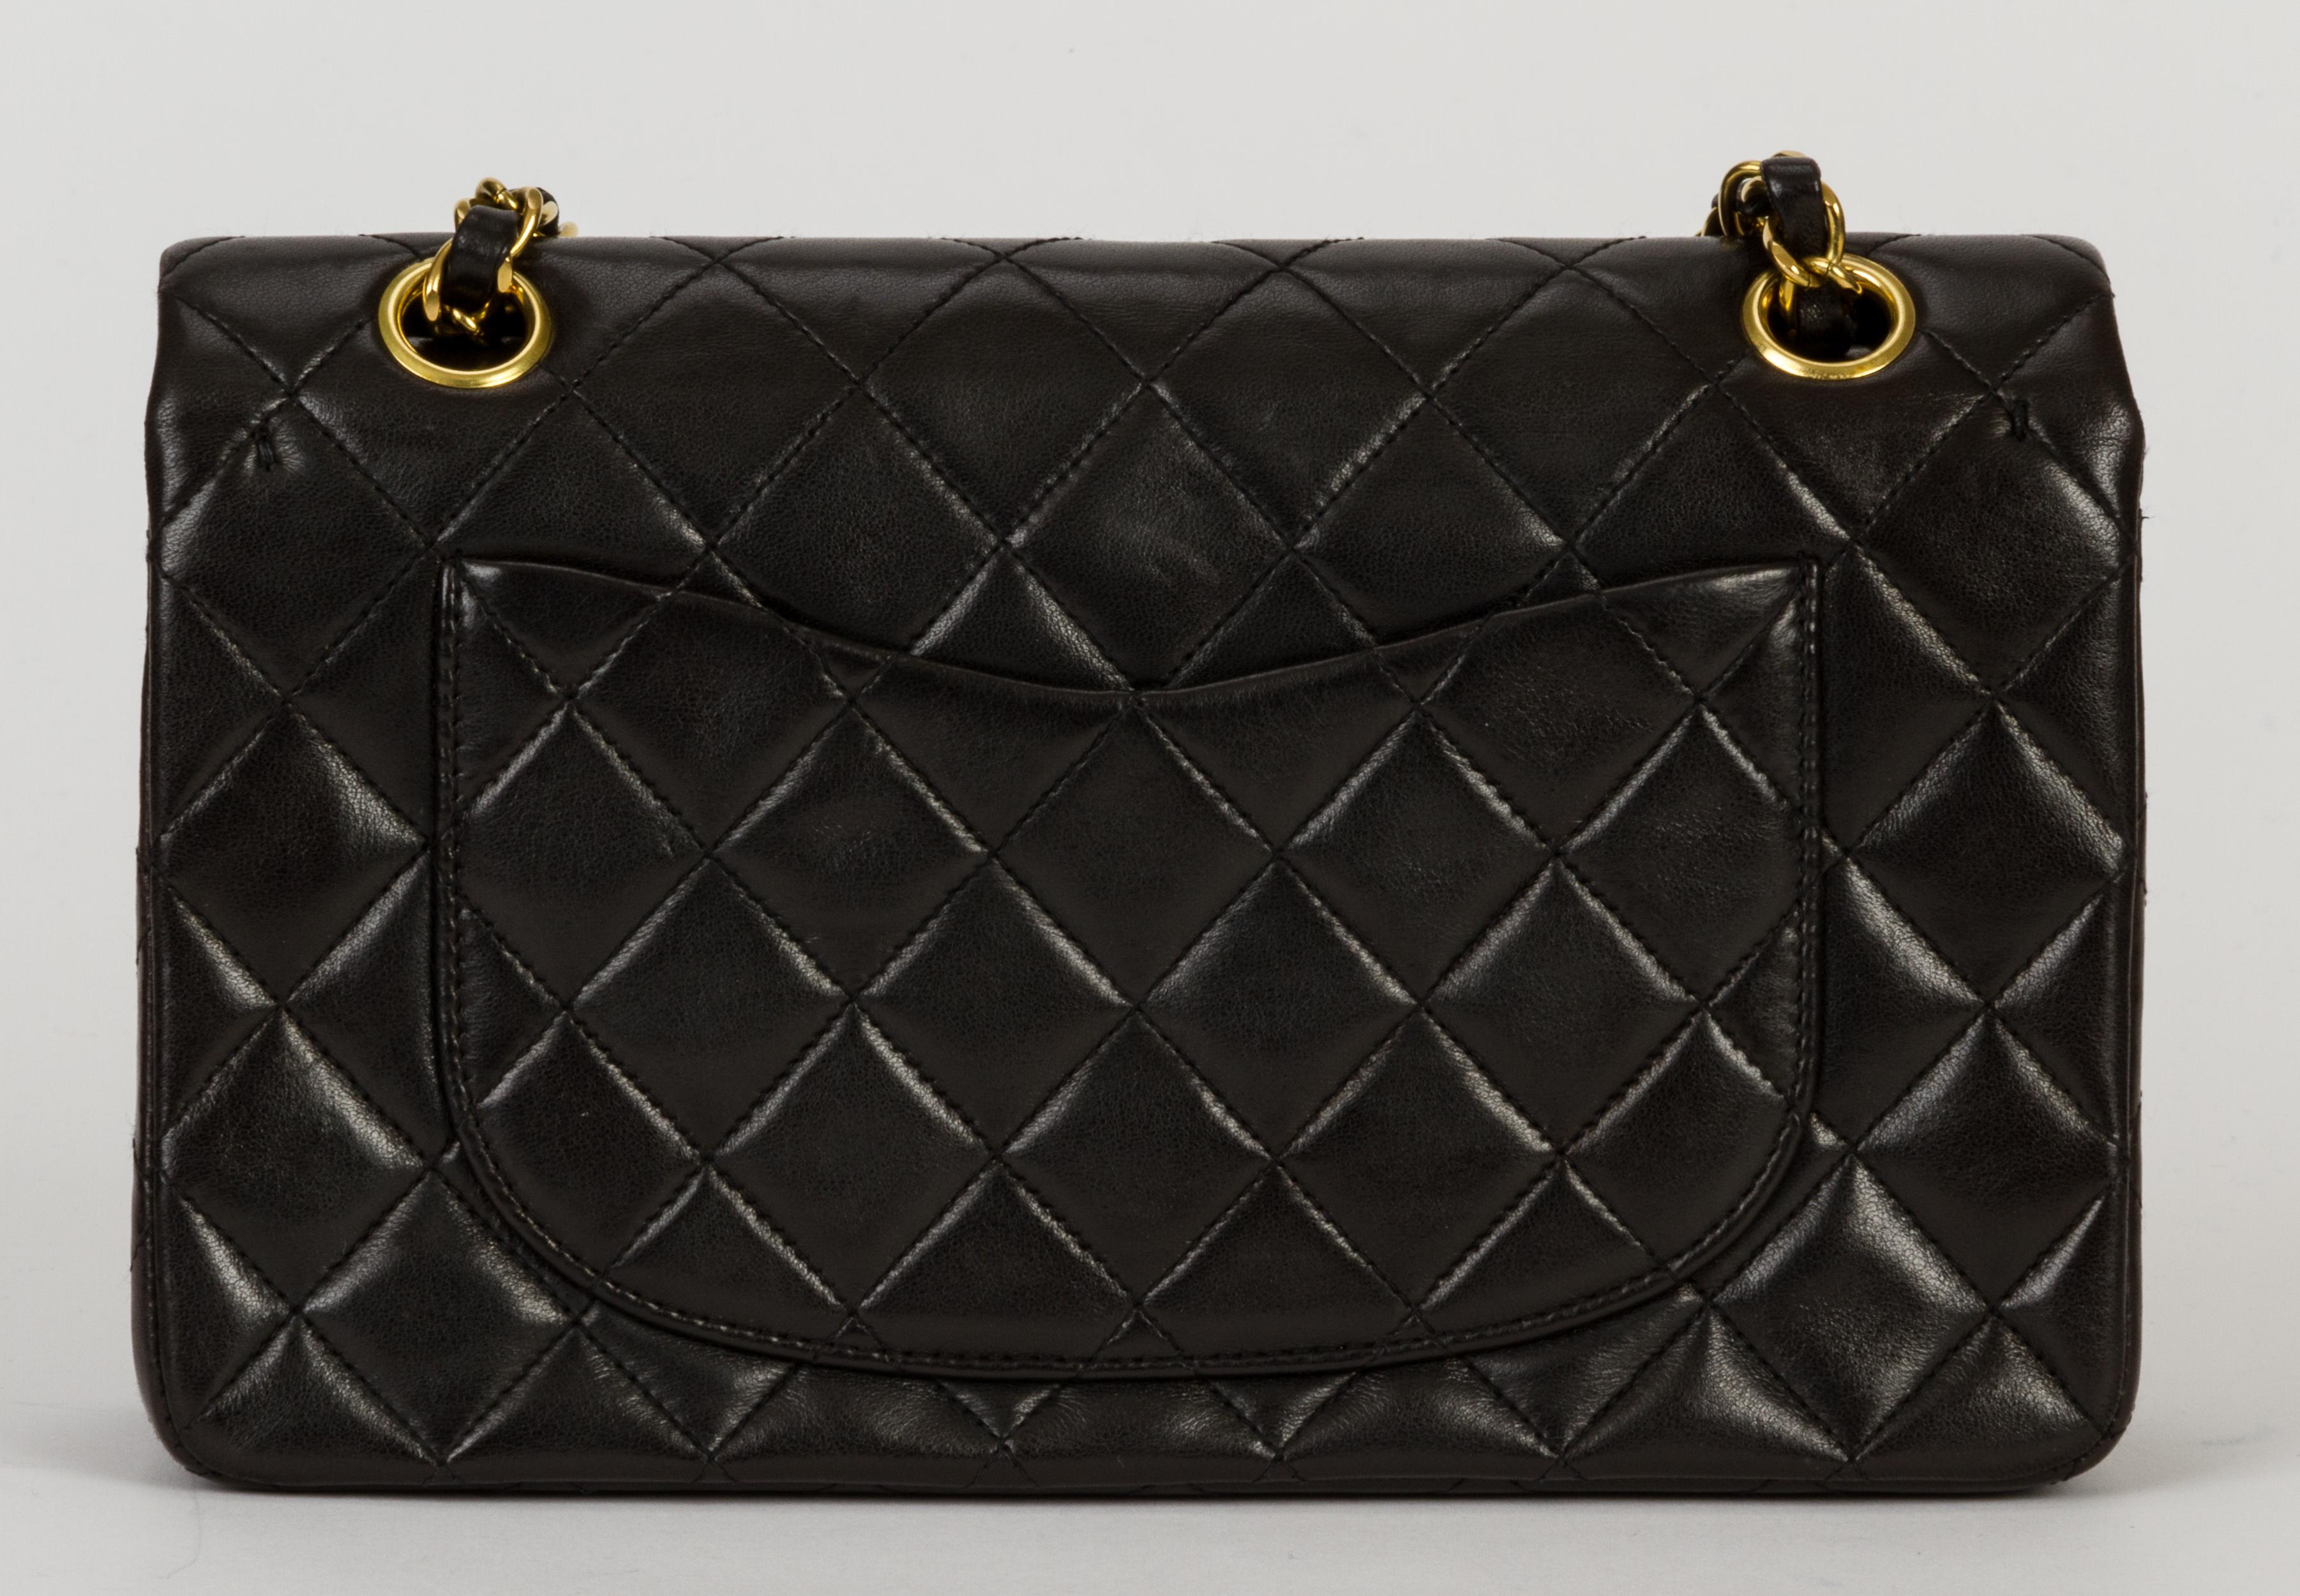 black and gold chanel bag